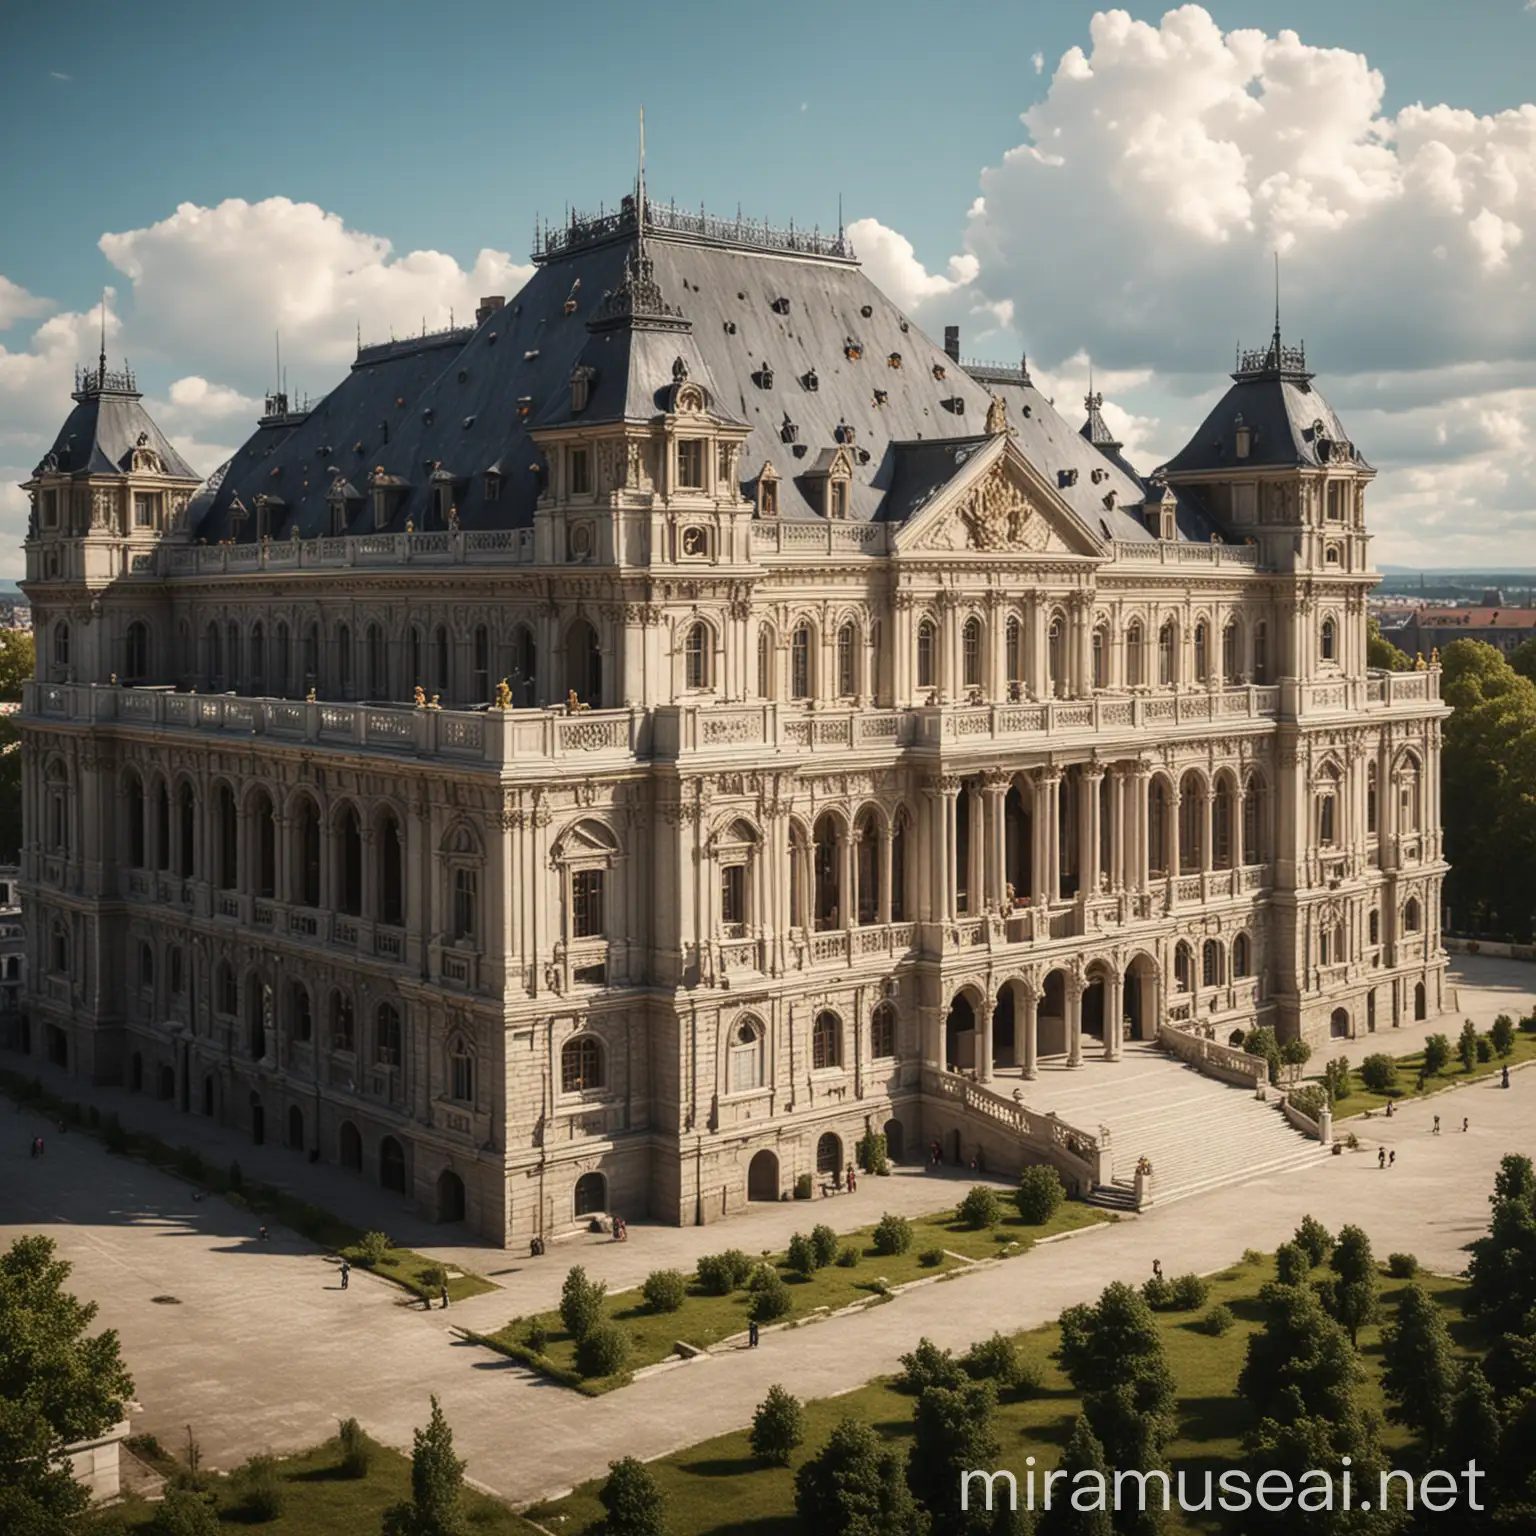 Grand European Palace with Ornate Architecture and Lush Gardens